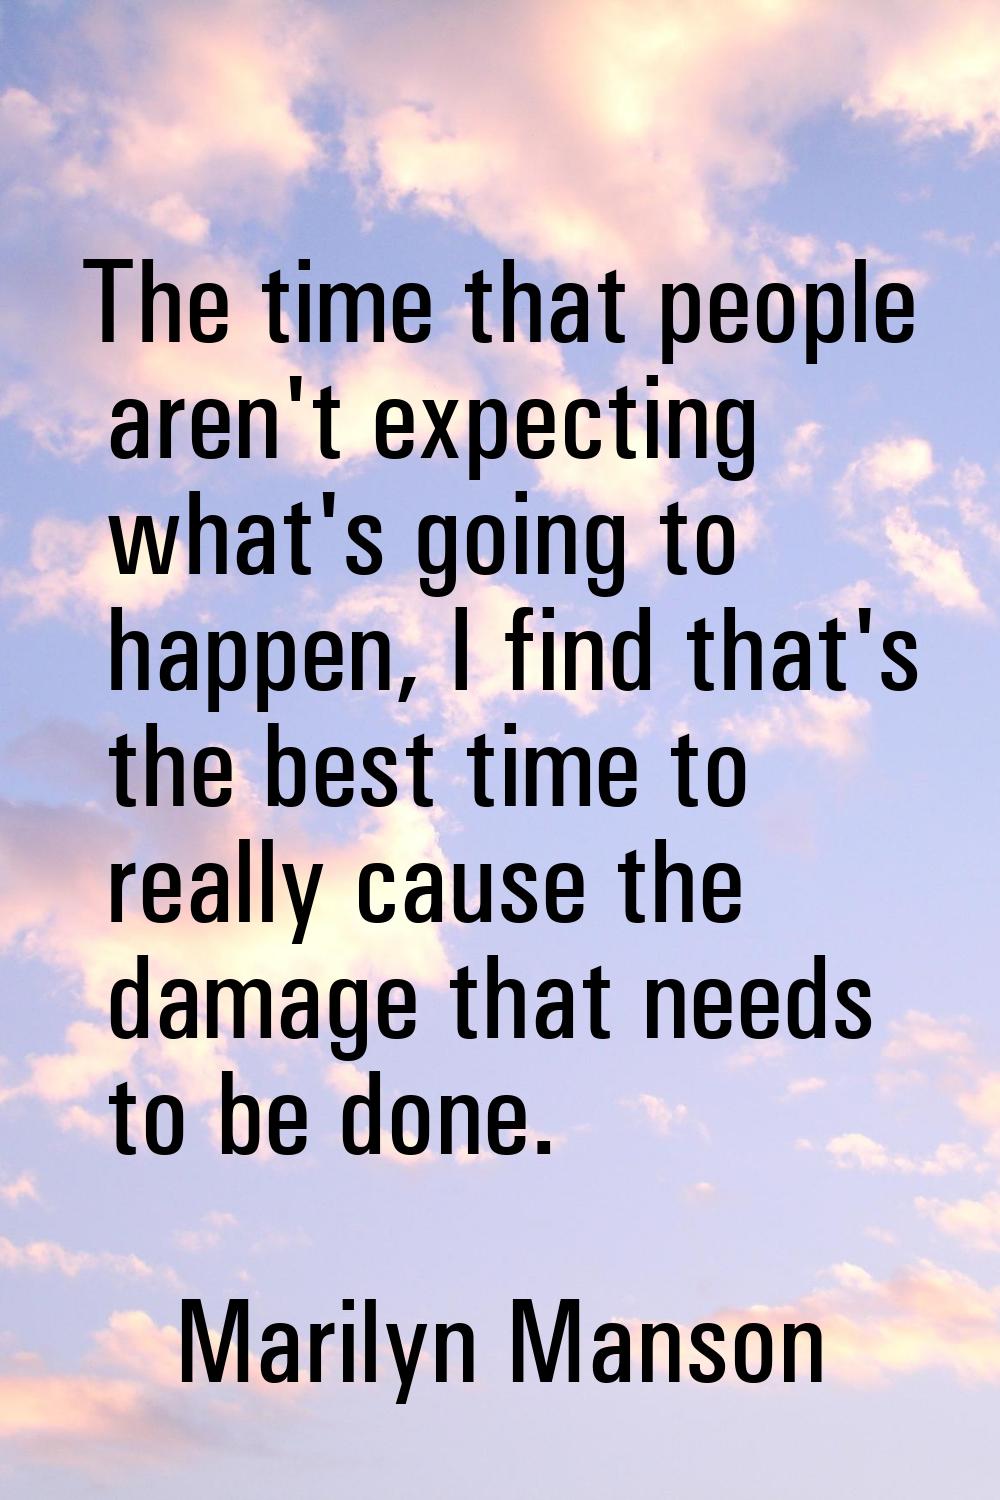 The time that people aren't expecting what's going to happen, I find that's the best time to really